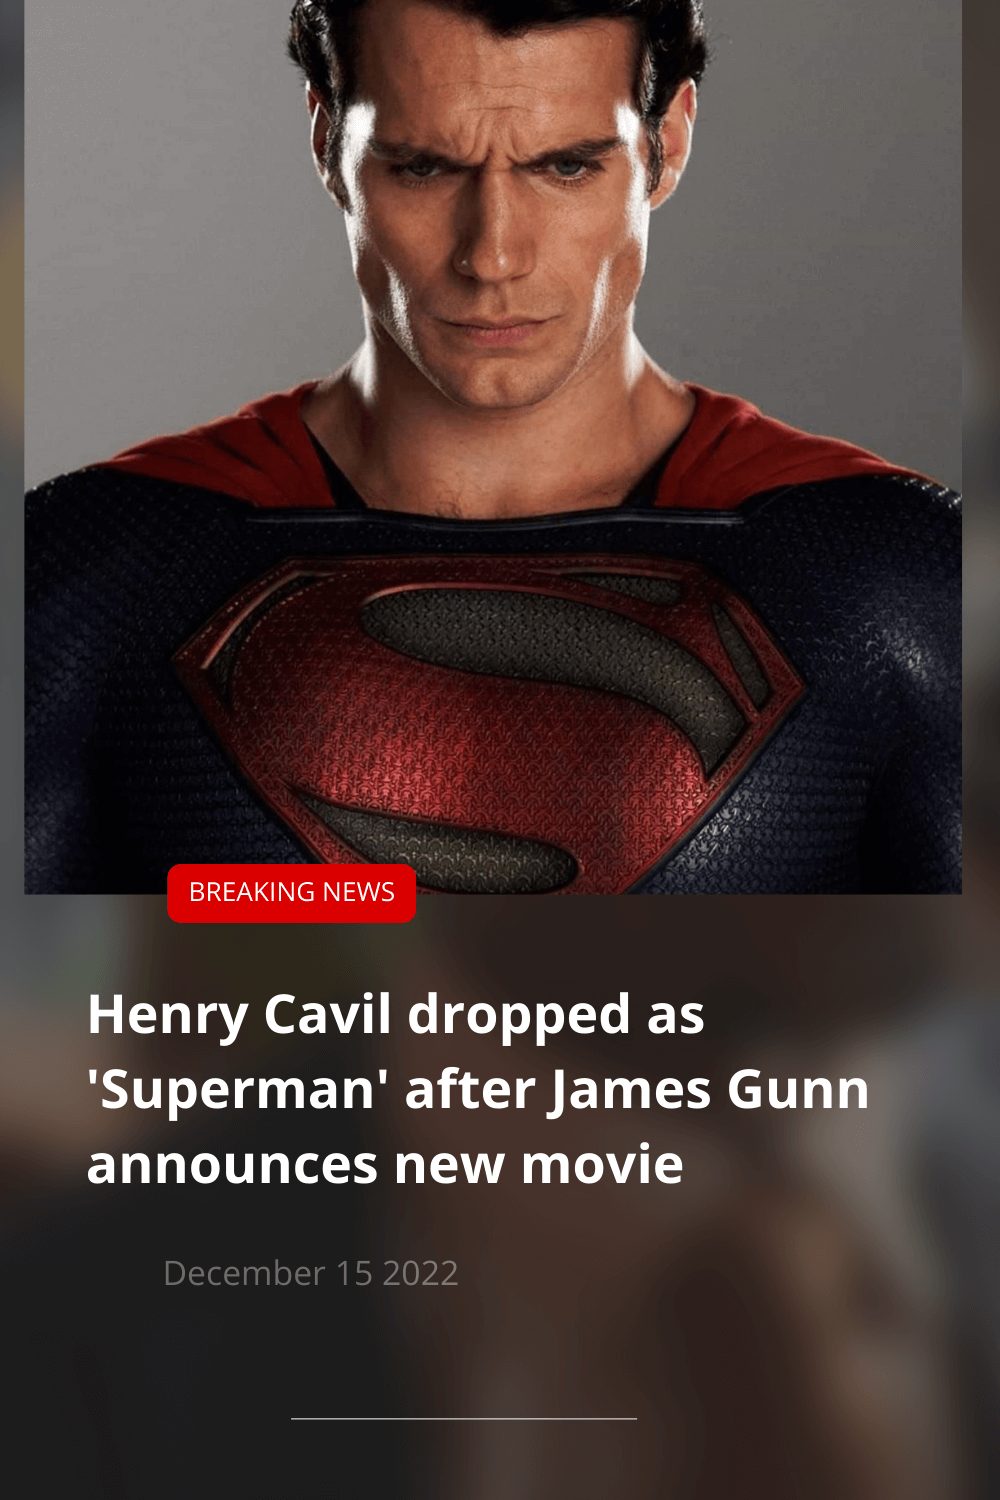 Henry Cavill is not Superman anymore, hurt fans go back to Black